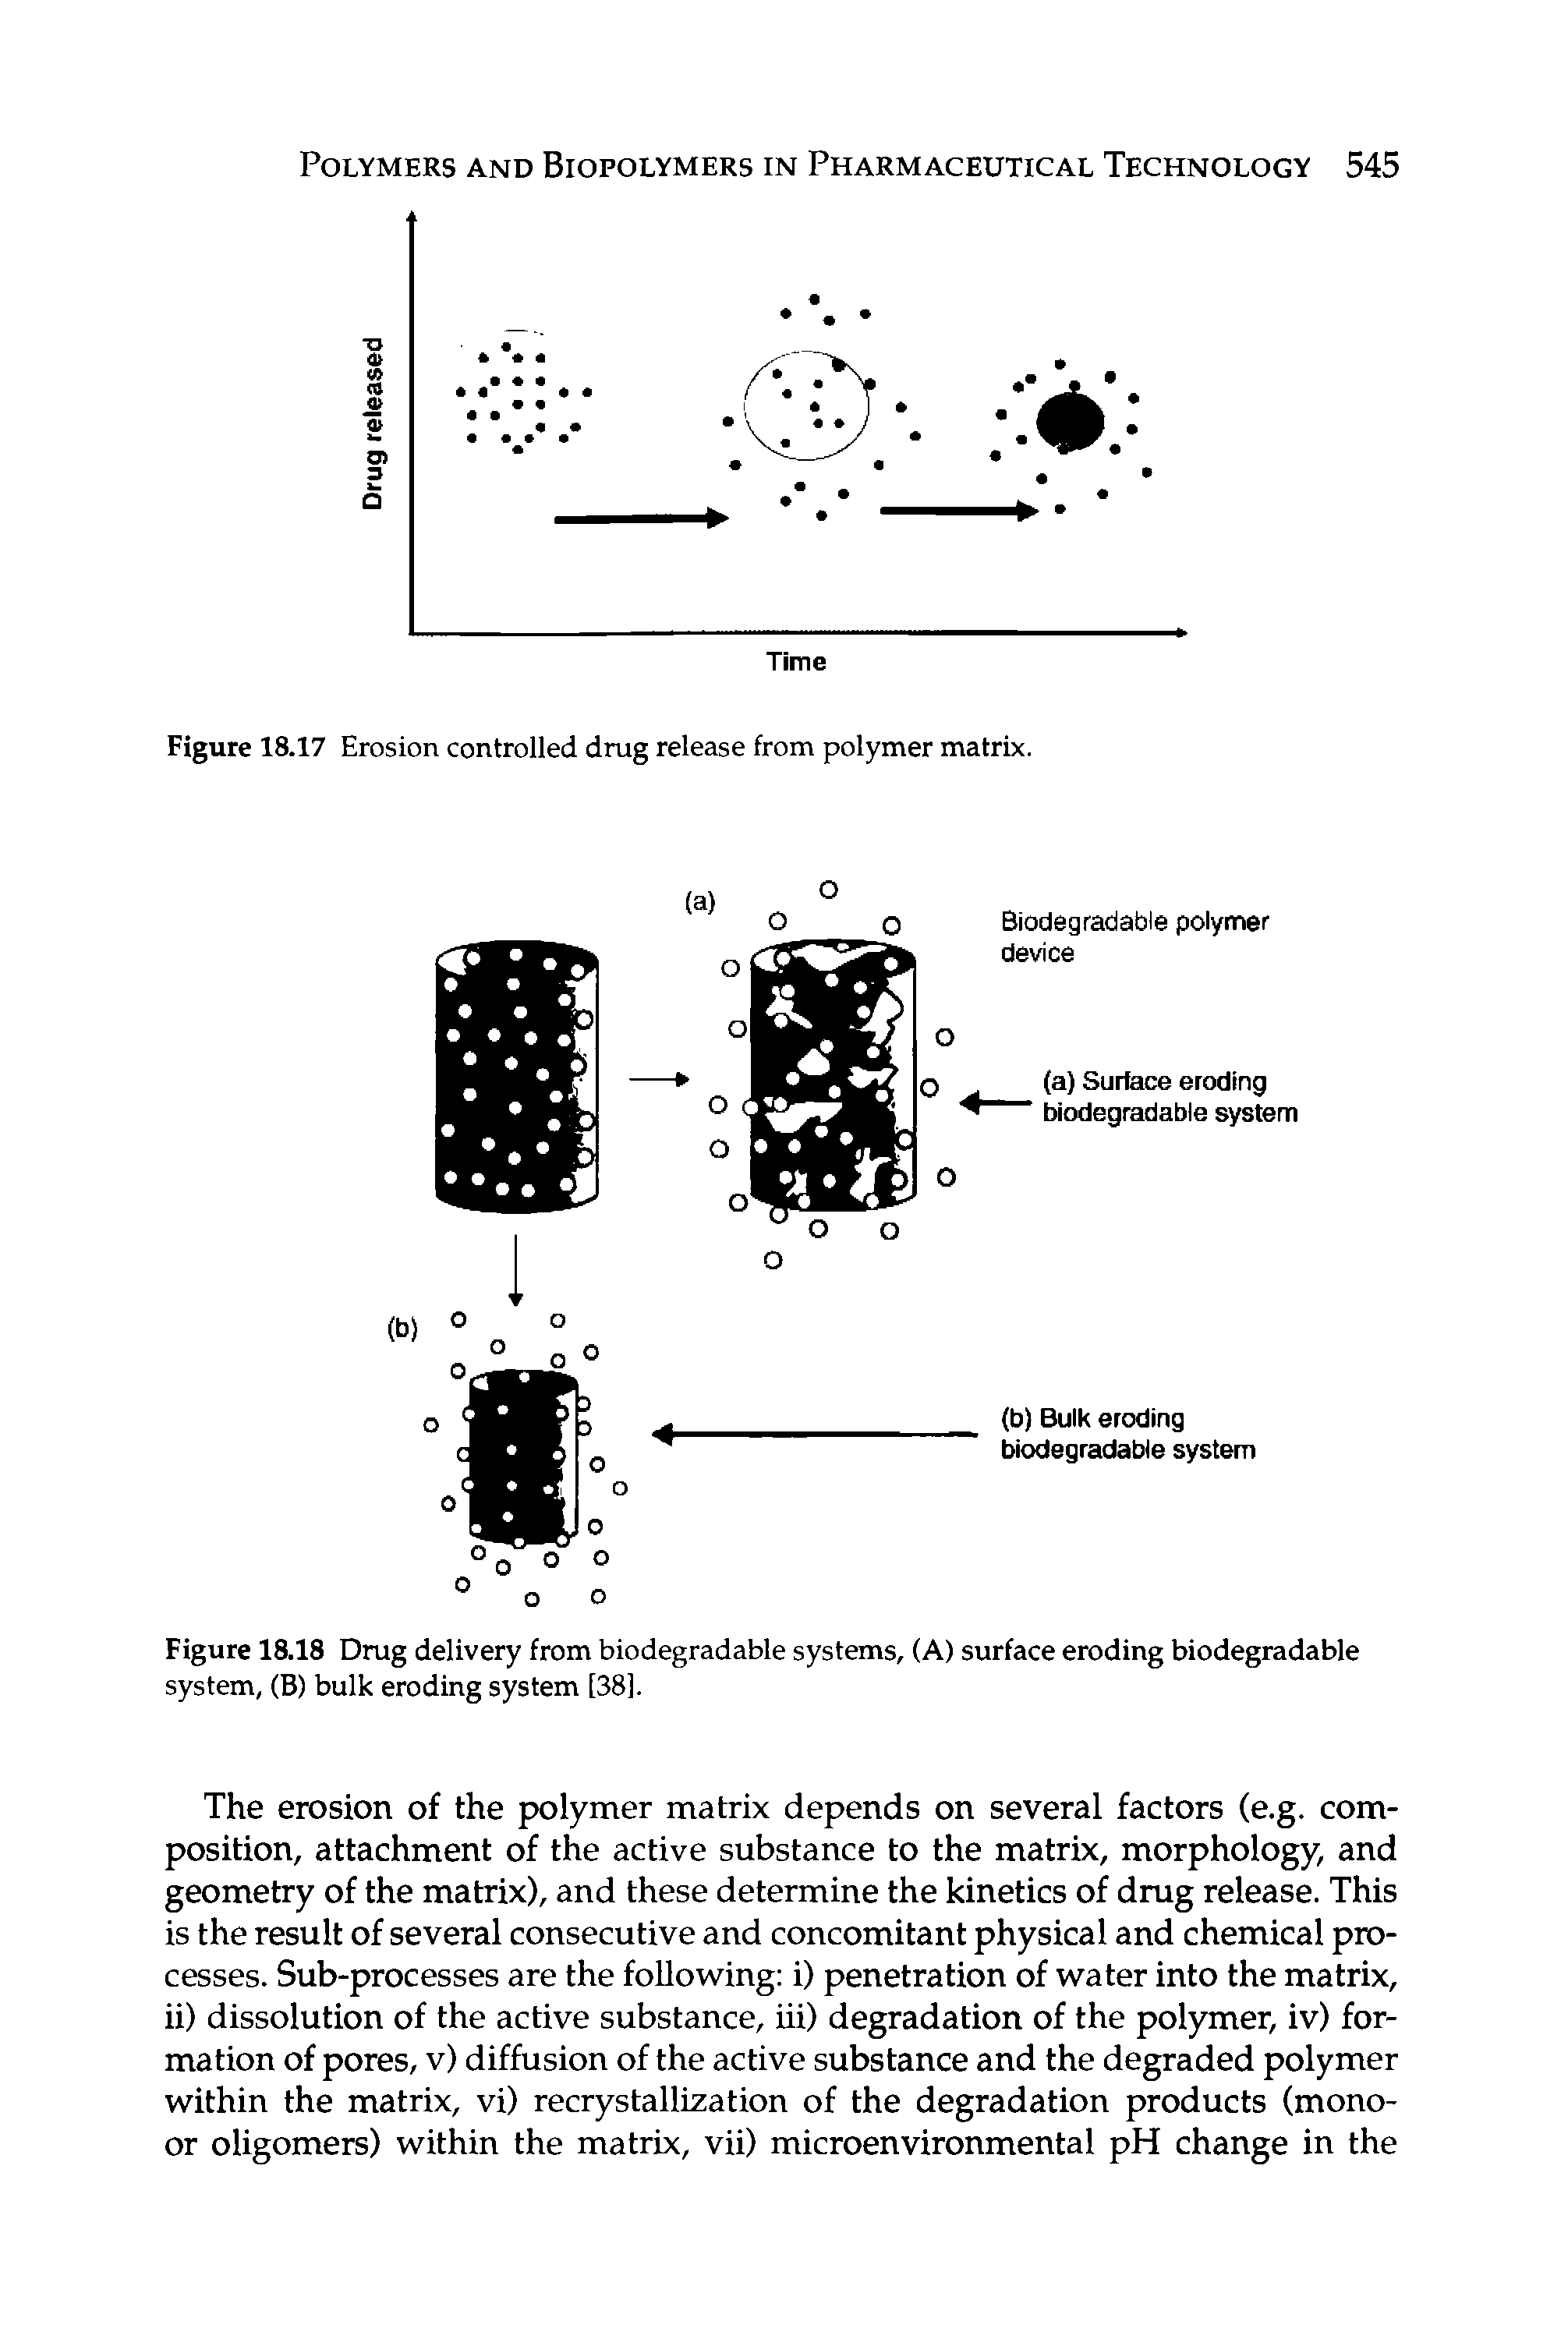 Figure 18.17 Erosion controlled drug release from polymer matrix.